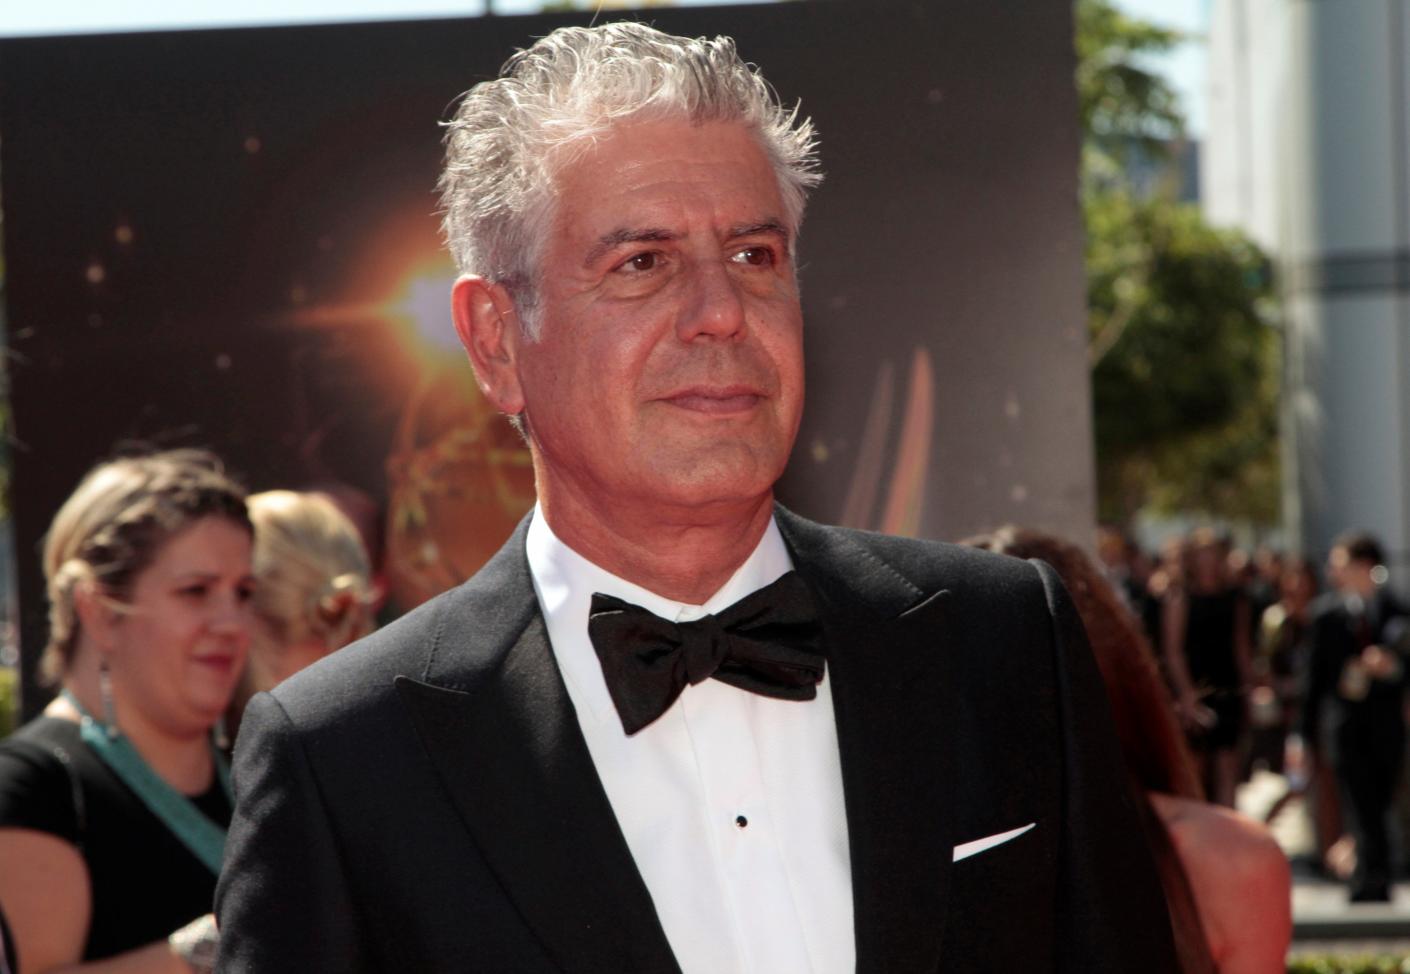 Visionary food and travel journalist Anthony Bourdain, who loved Vietnam, will be missed